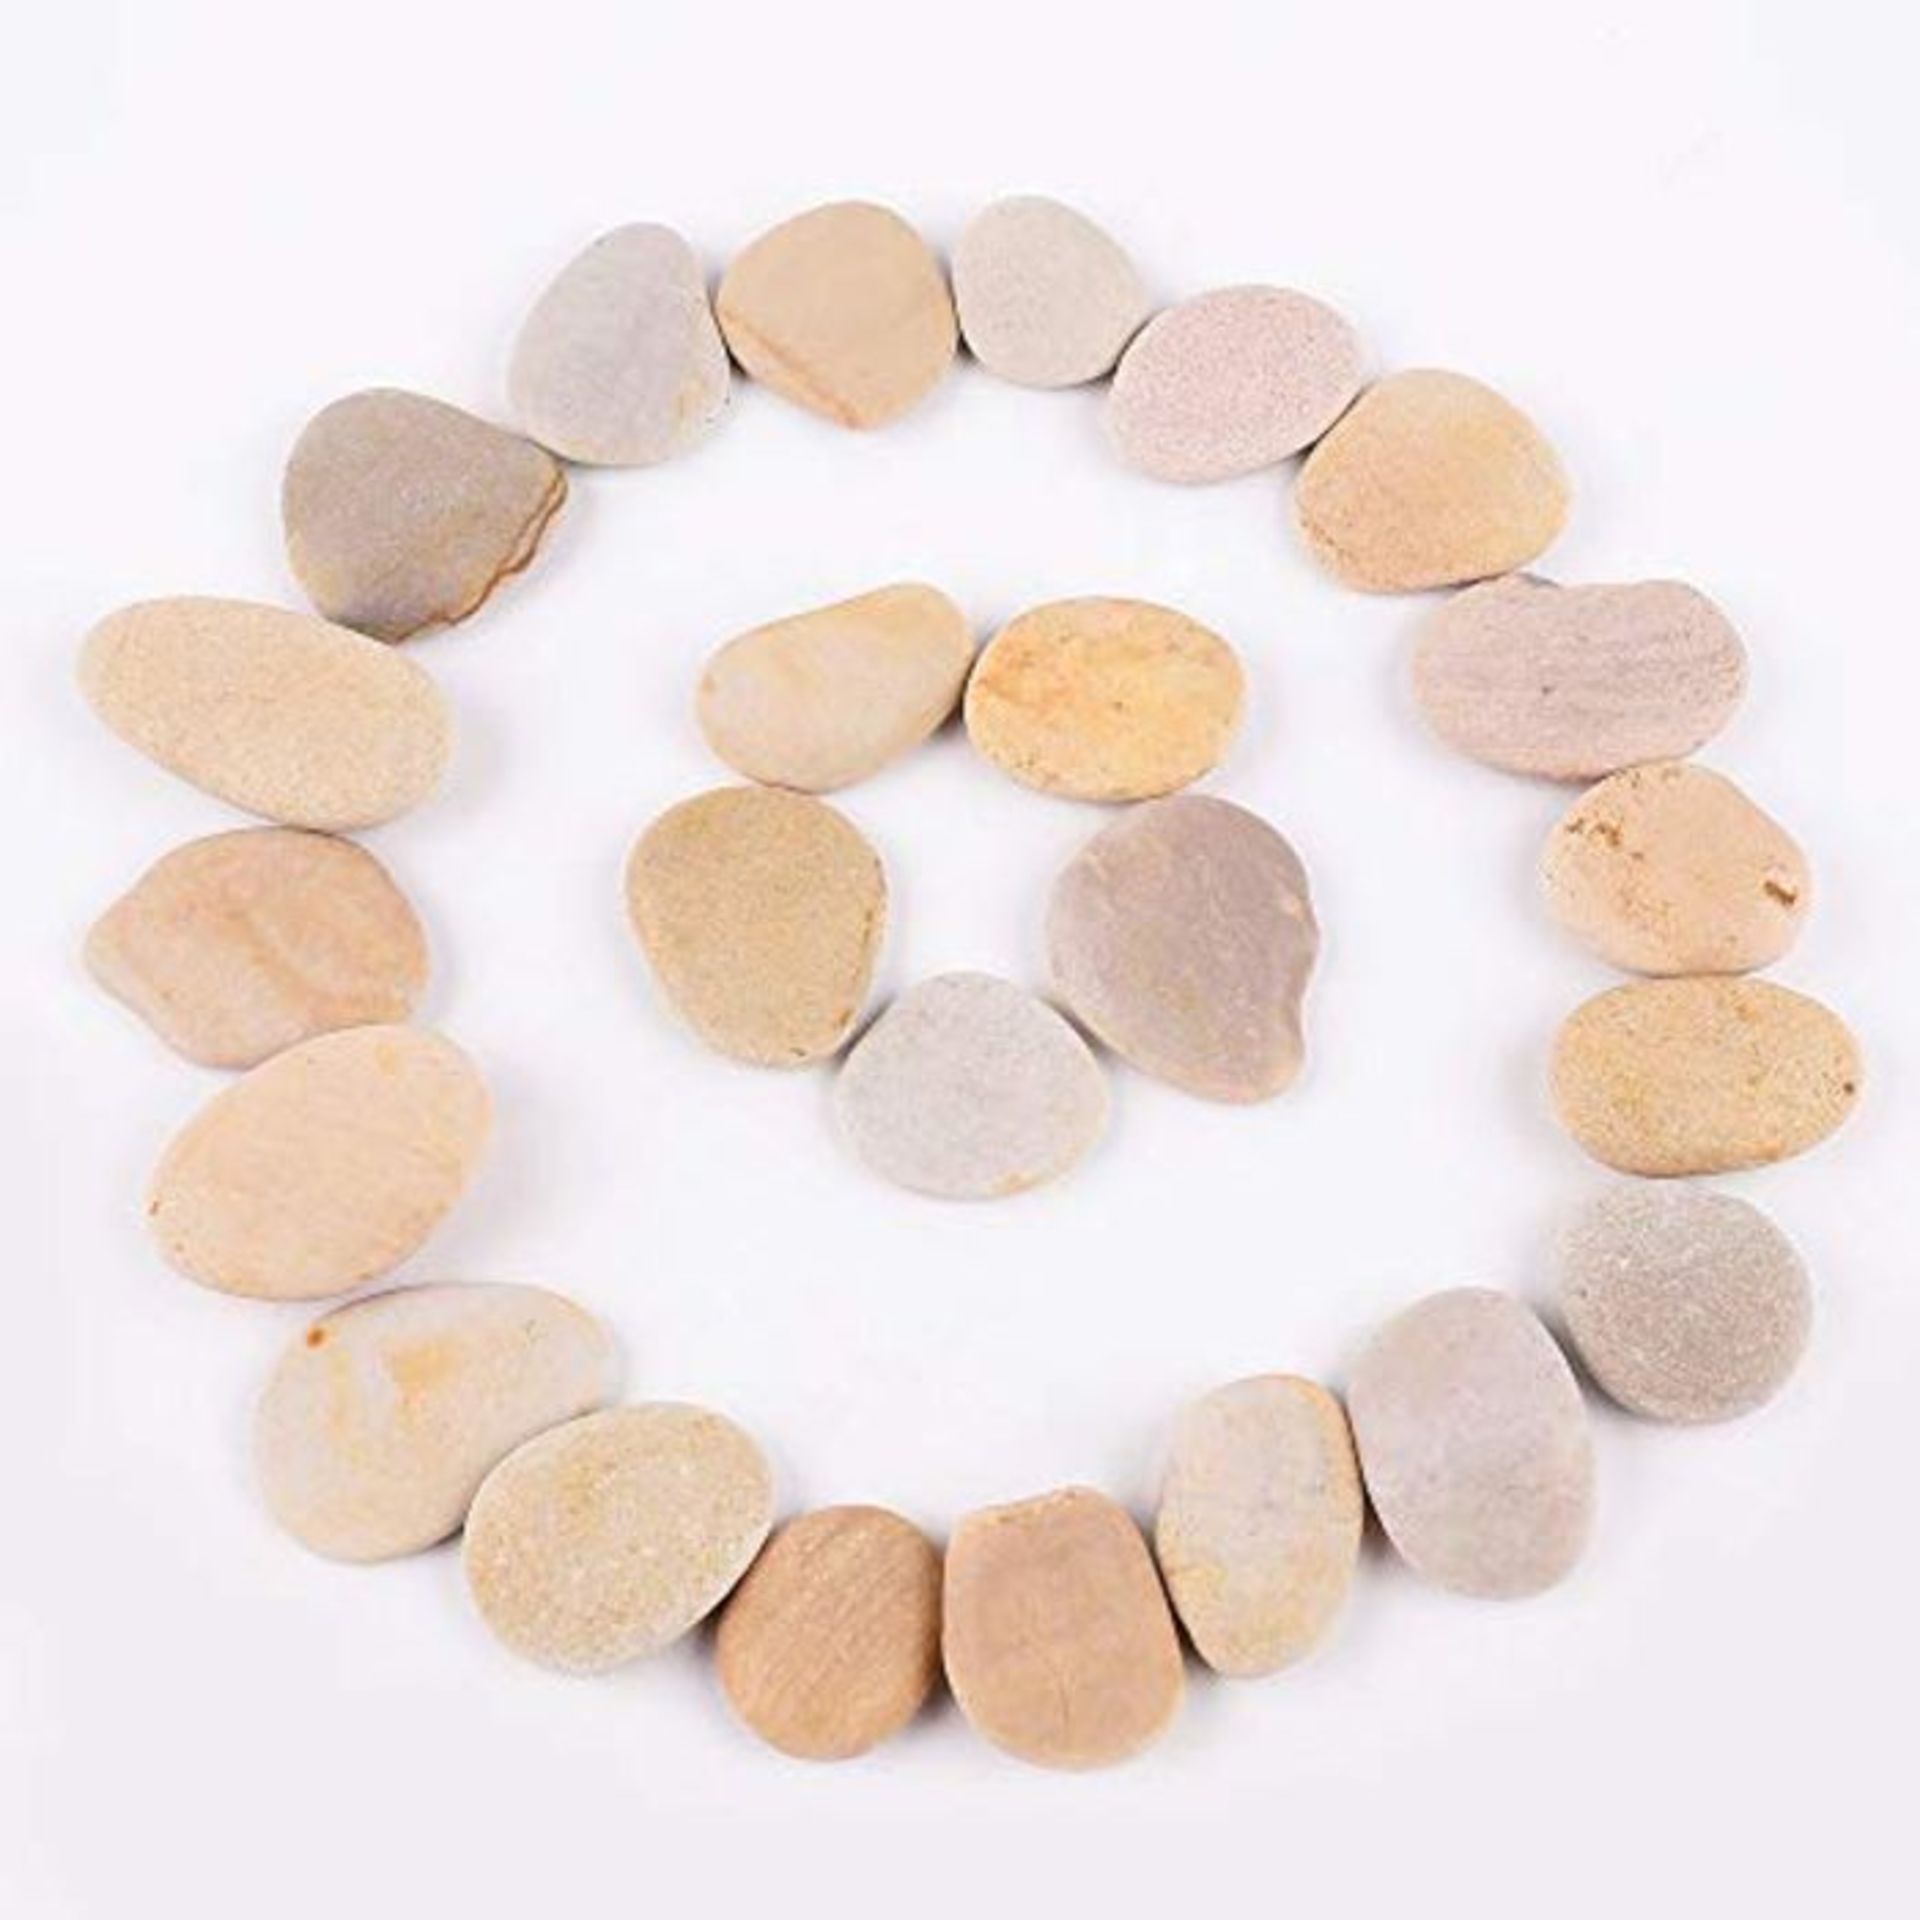 ROCKIMPACT 24 Beige Painting Rocks - Natural River Rocks with Smooth Surface for Arts